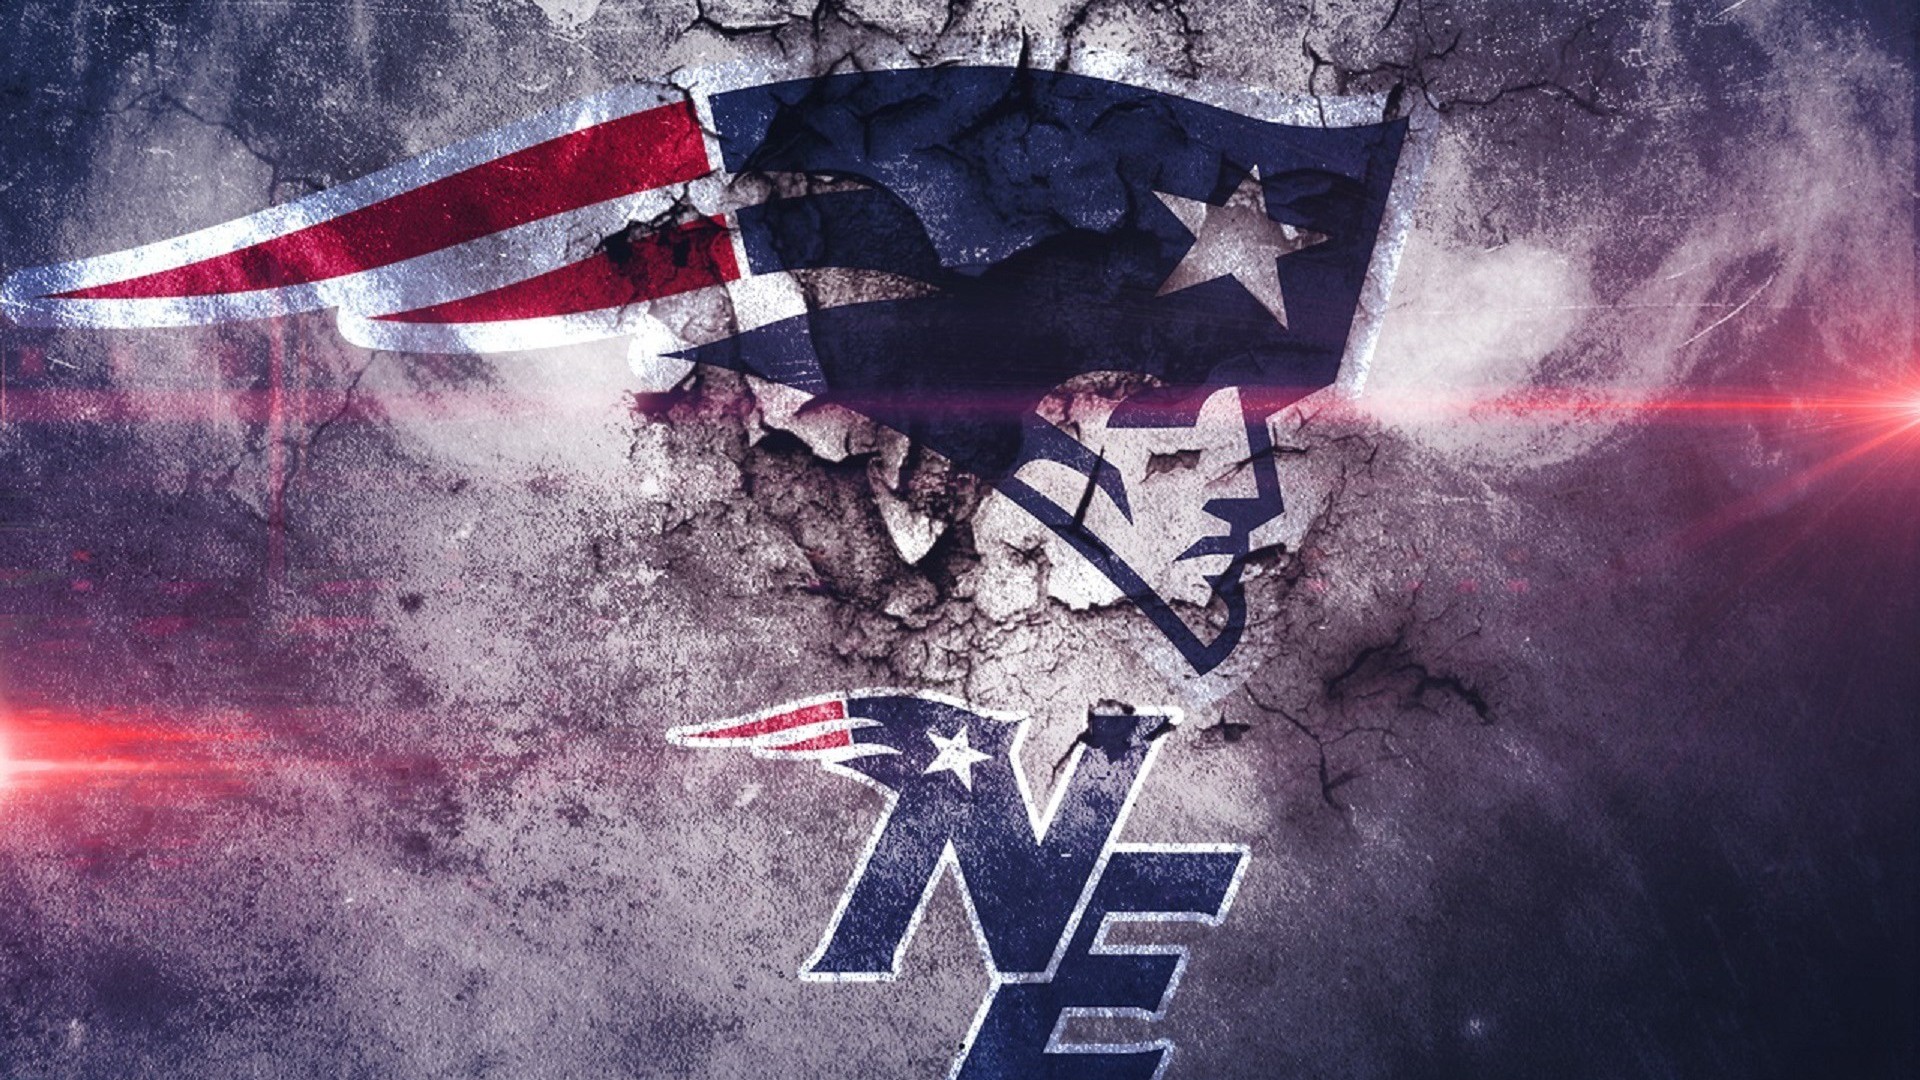 New England Patriots Wallpaper With high-resolution 1920X1080 pixel. Download and set as wallpaper for Desktop Computer, Apple iPhone X, XS Max, XR, 8, 7, 6, SE, iPad, Android